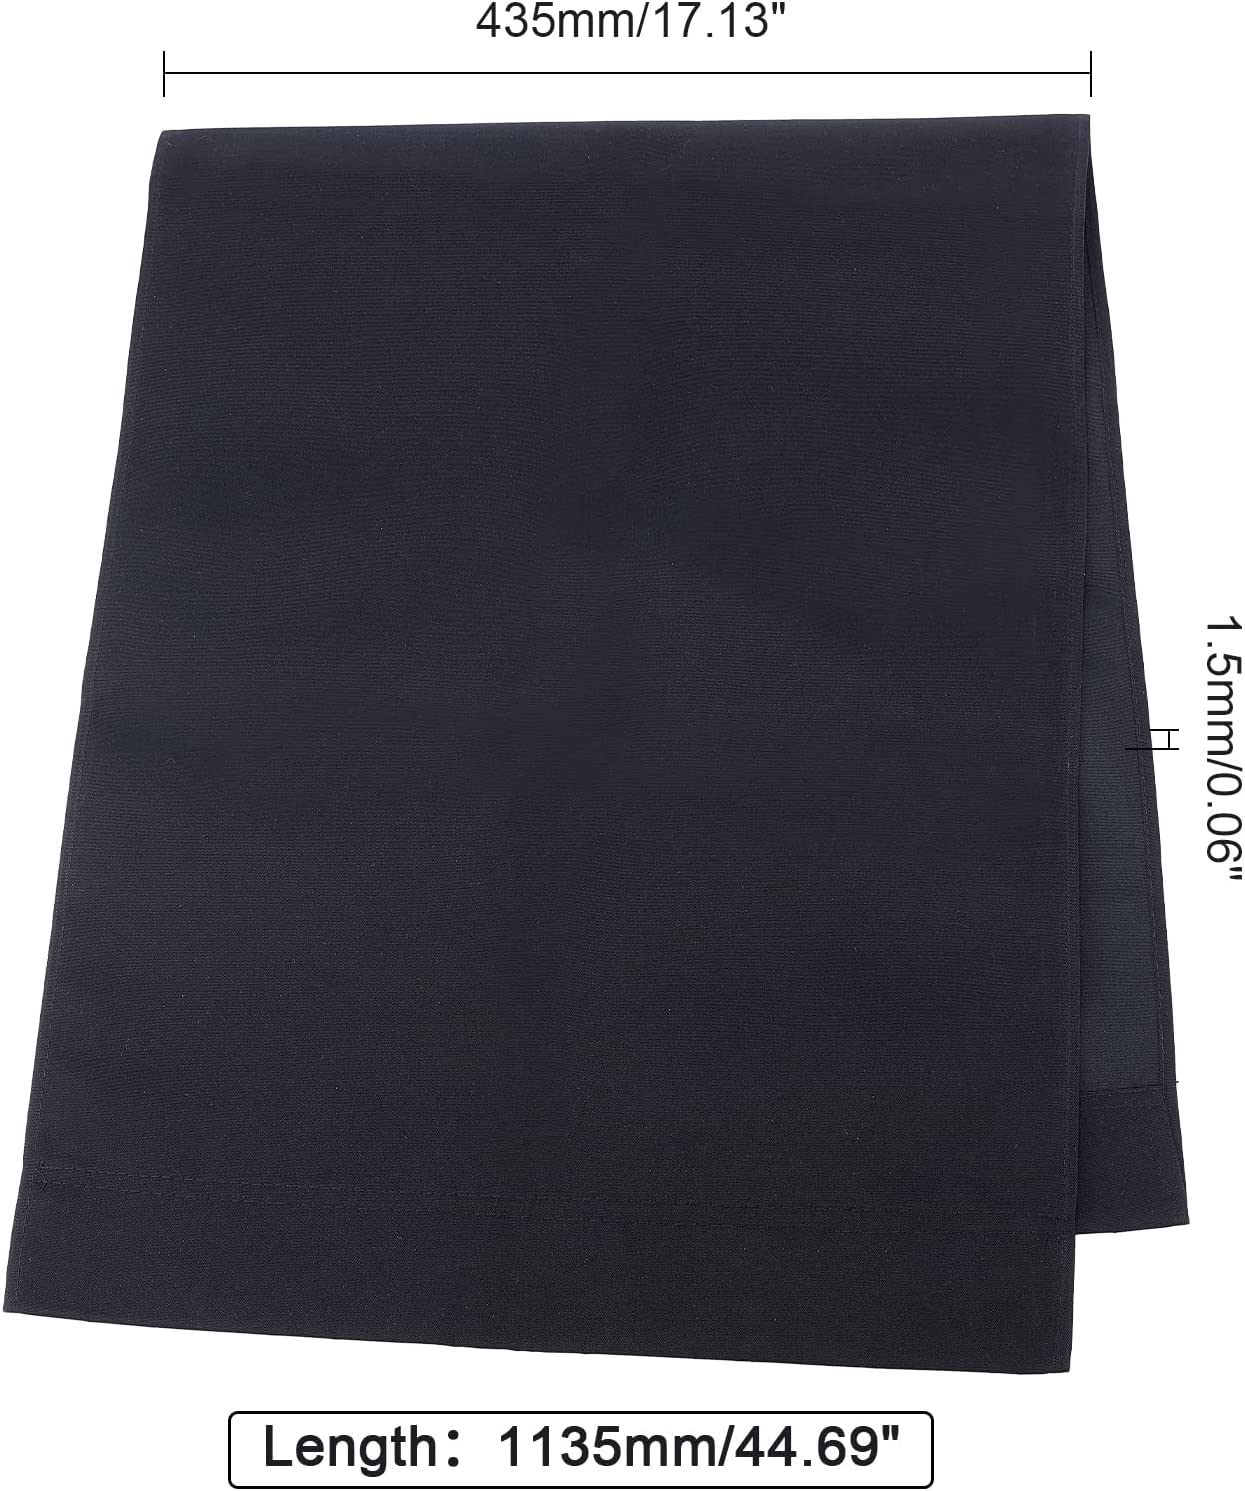 Beach Sling Chair Replacement Fabric Black Casual Simple Beach Chair Replacement Oxford Cloth for Home Beach Chair Protect Replacement (44.69x17.13inch) - image 4 of 5